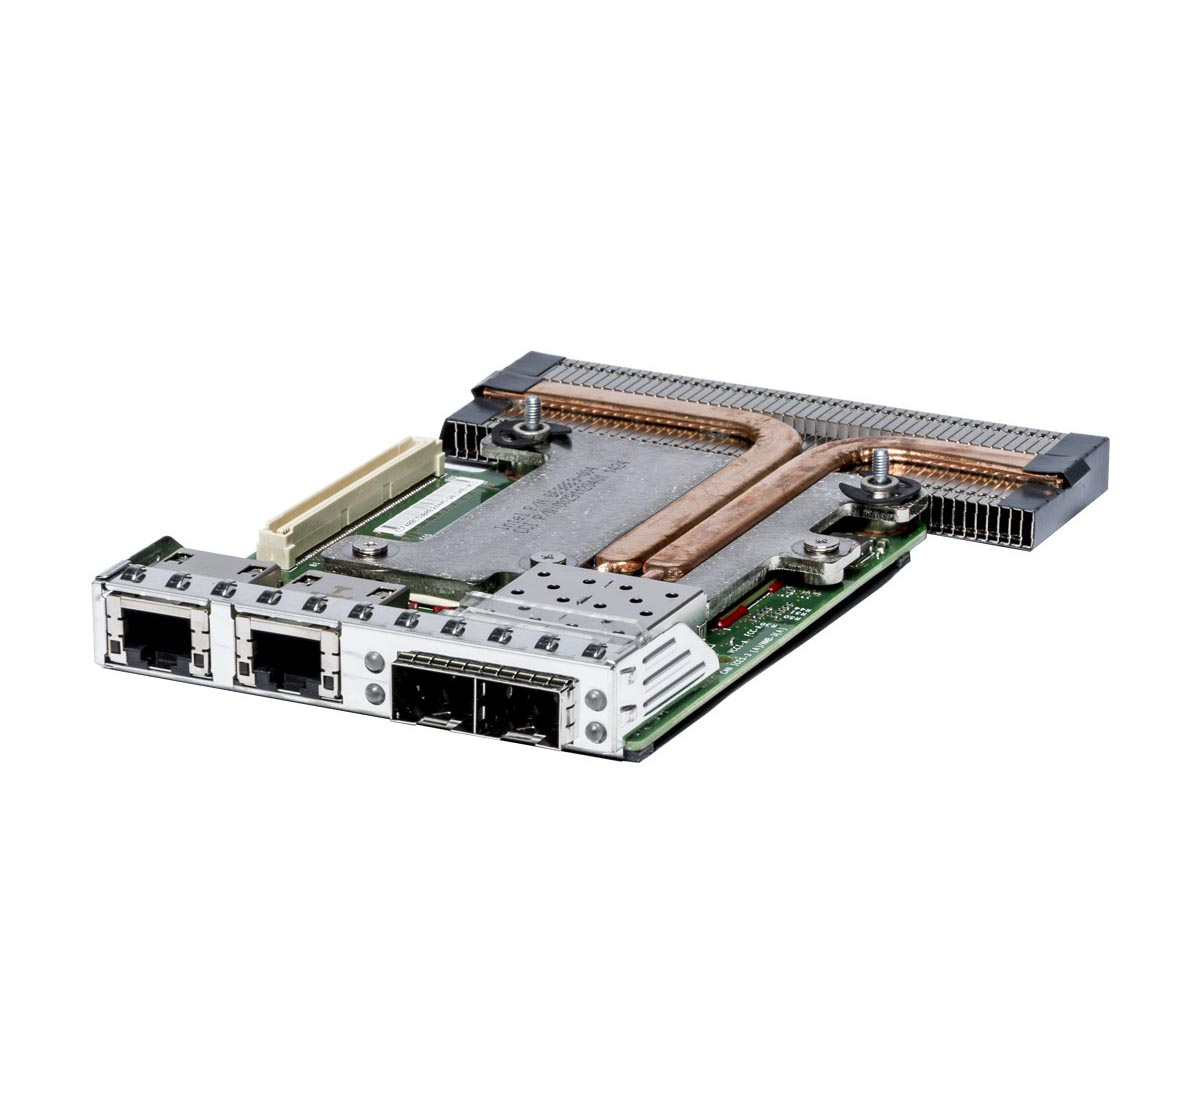 0C63DV Dell 57800s Dual Port 10GBE SFP+ with 2 X 1GBE Card